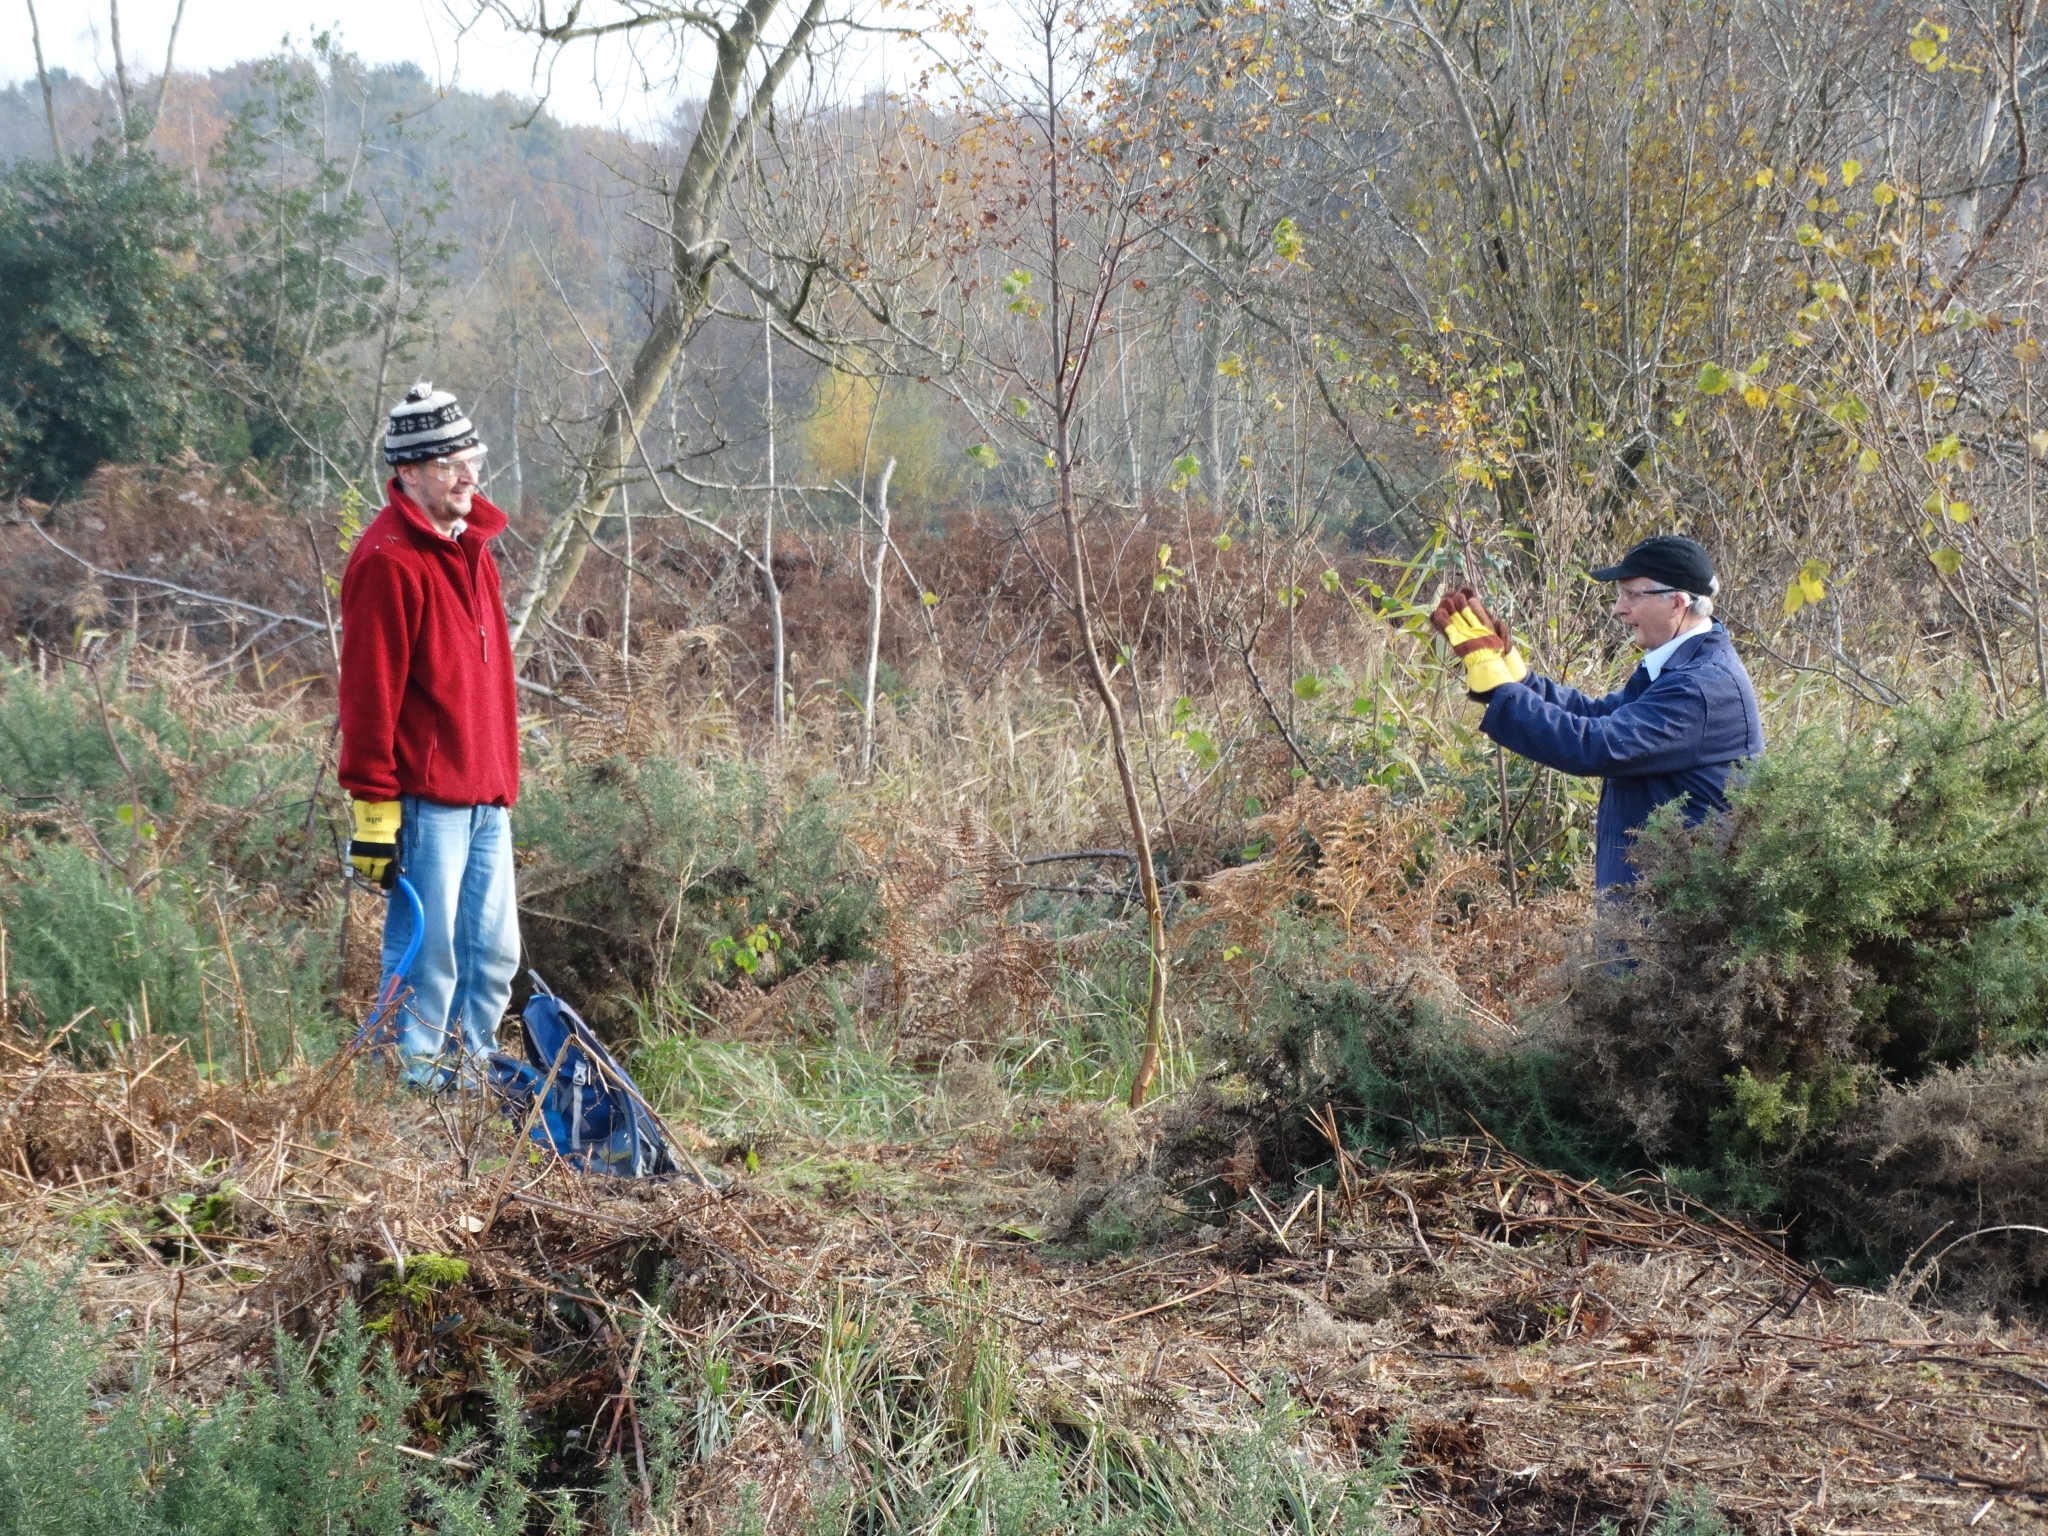 A photo from the FoTF Conservation Event - November 2019 - Gorse Clearance at Hockham Hills & Holes : Volunteers at the work site